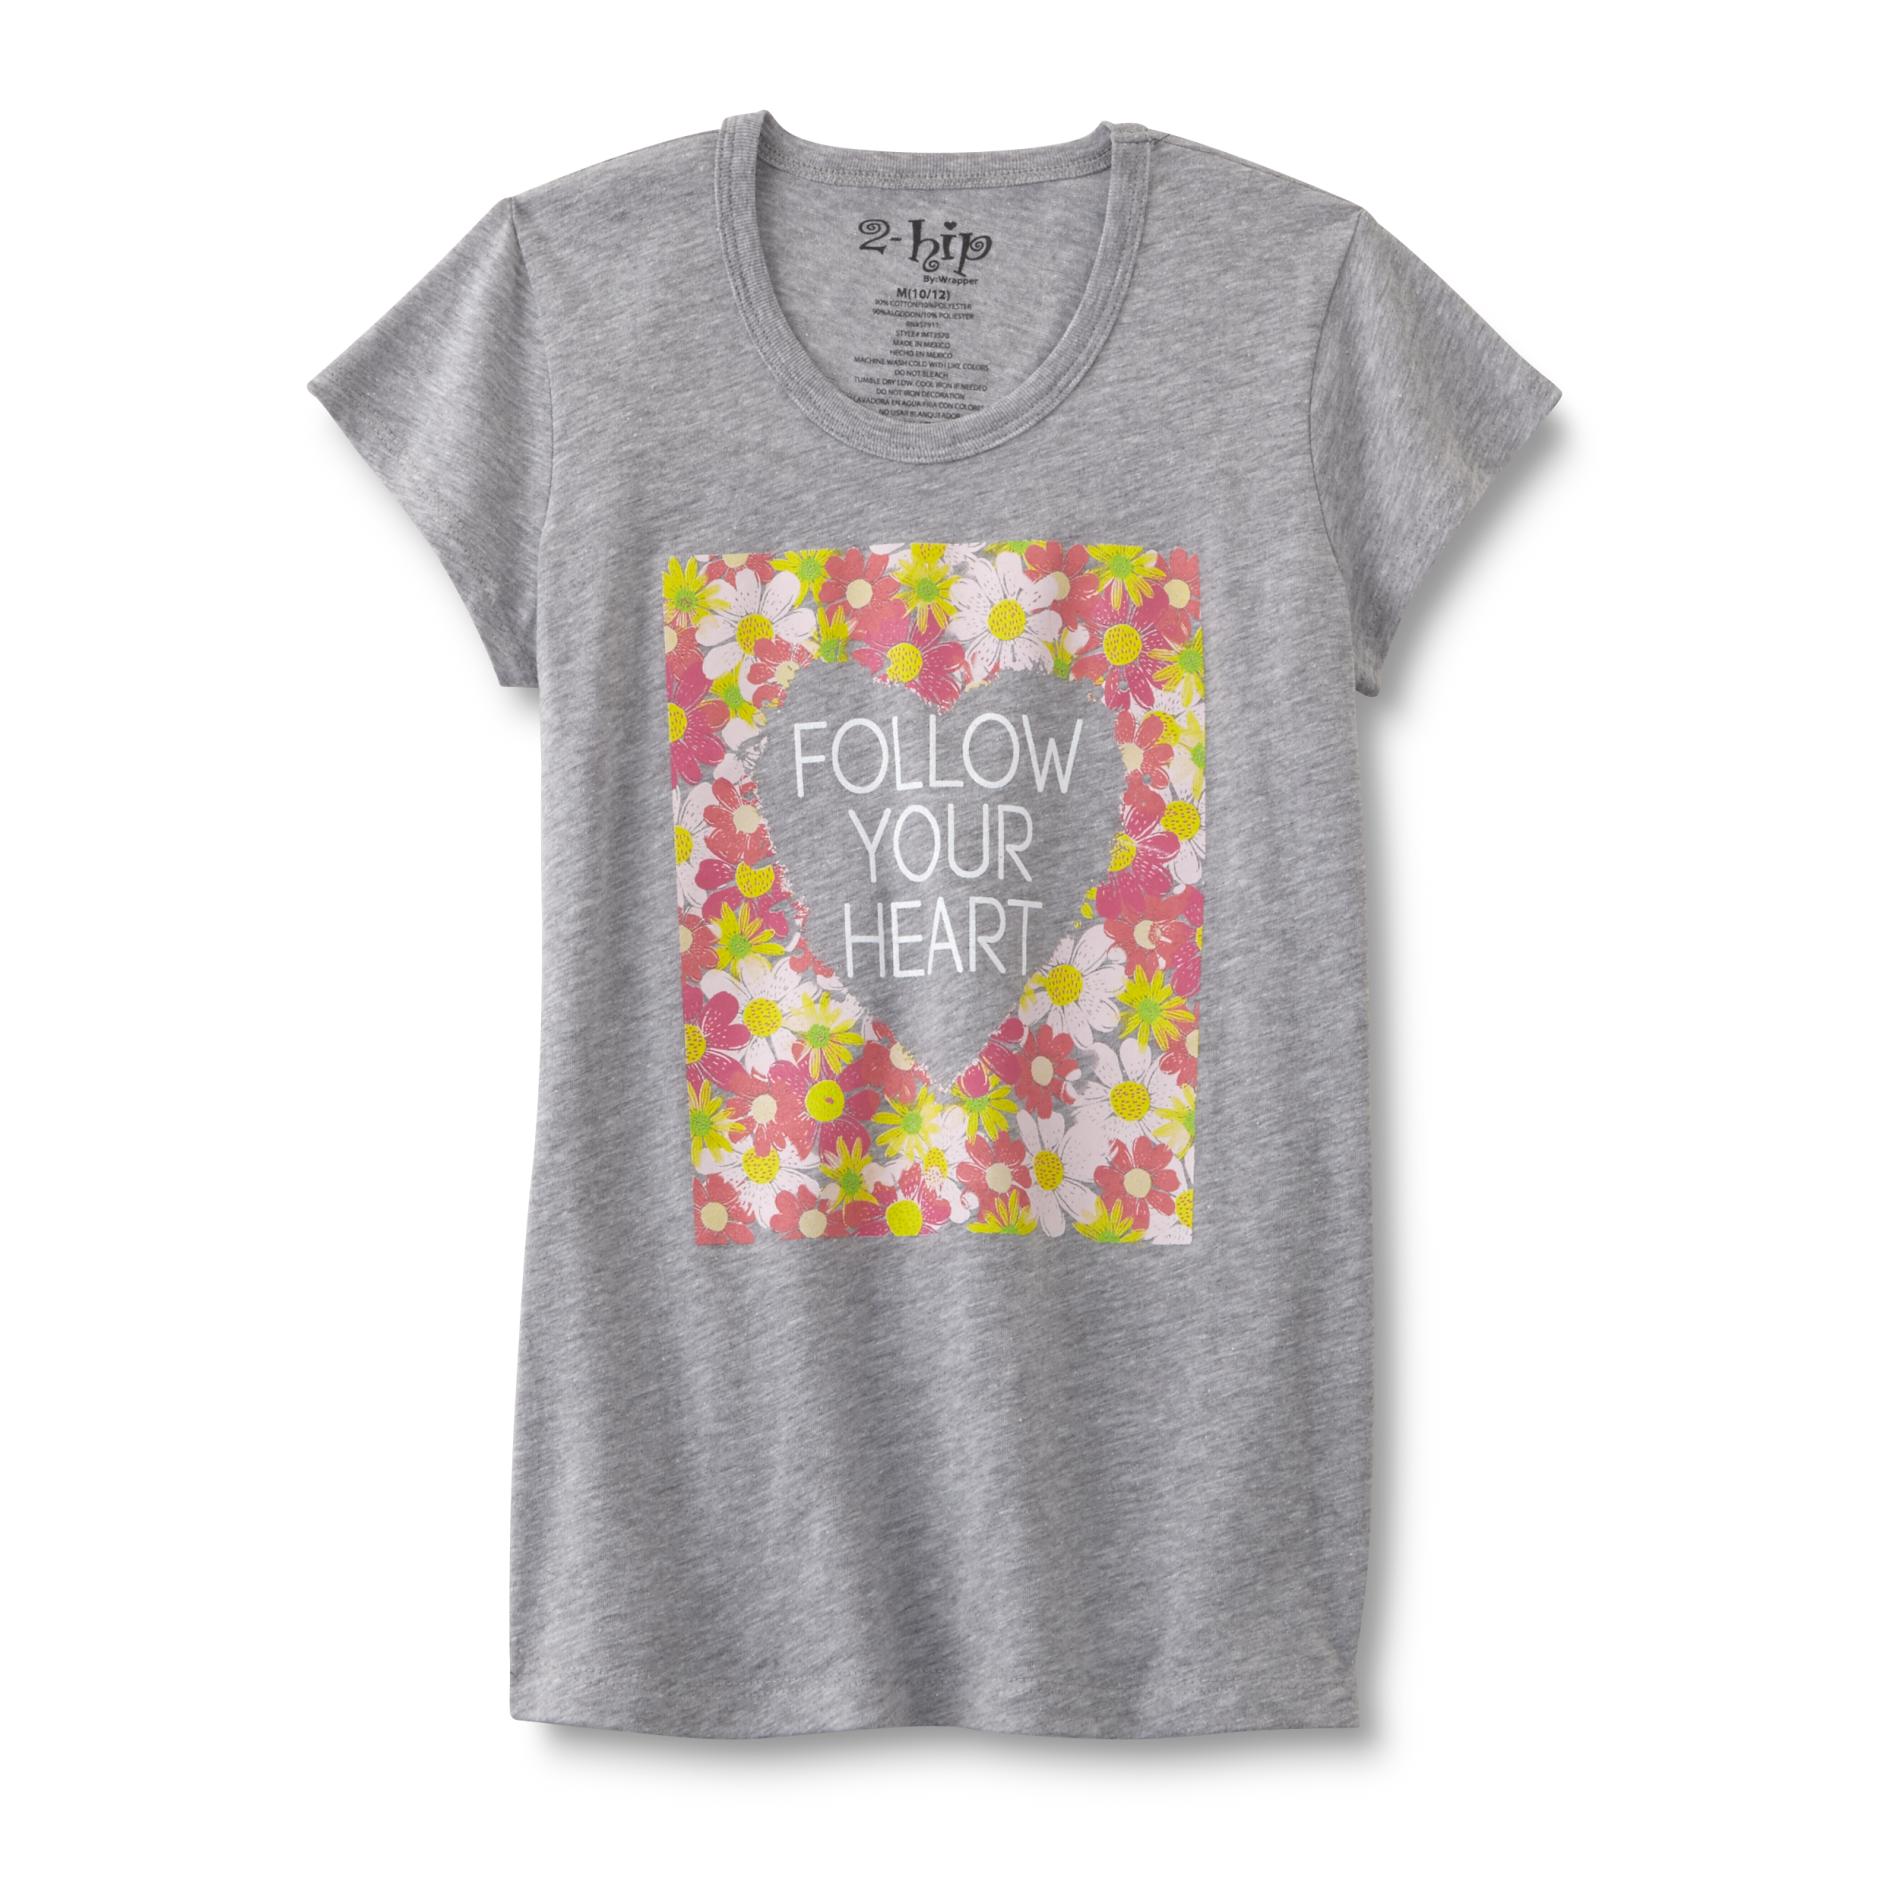 Wrapper Girl's Graphic T-Shirt - Heart